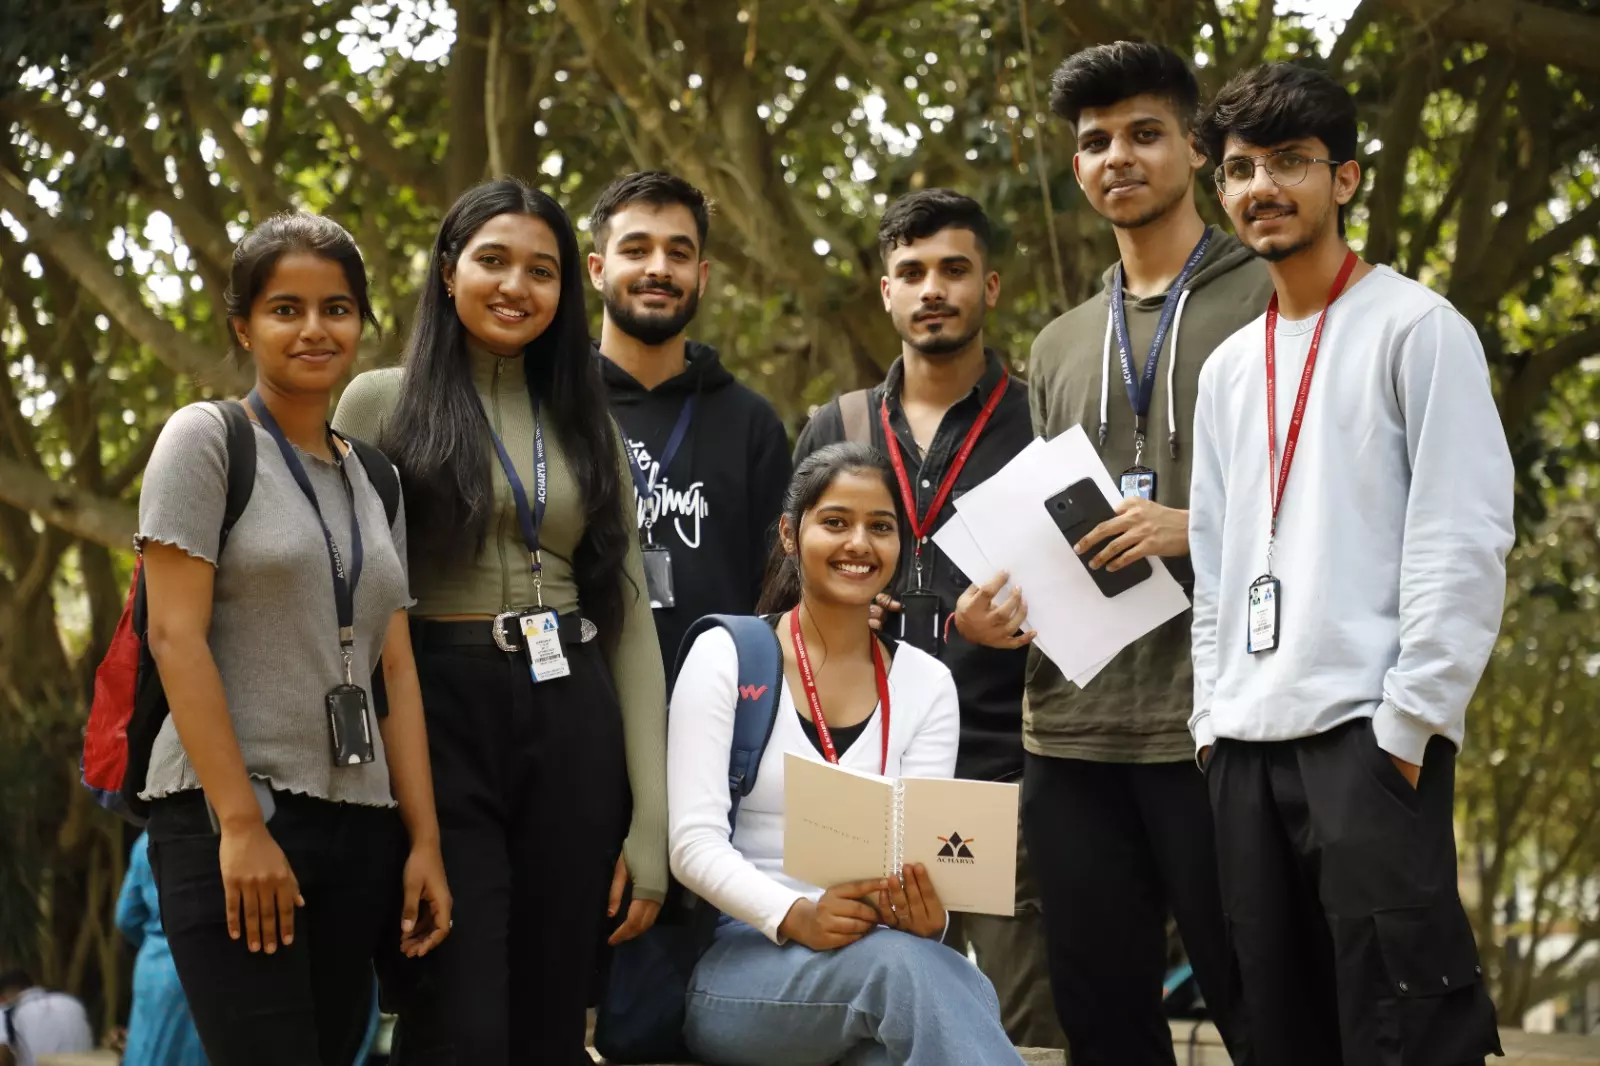 AIGS’ strategic industrial collaborations with companies like Microsoft, Google, L&T, and IBM, provide practical skills and professional exposure to its students.